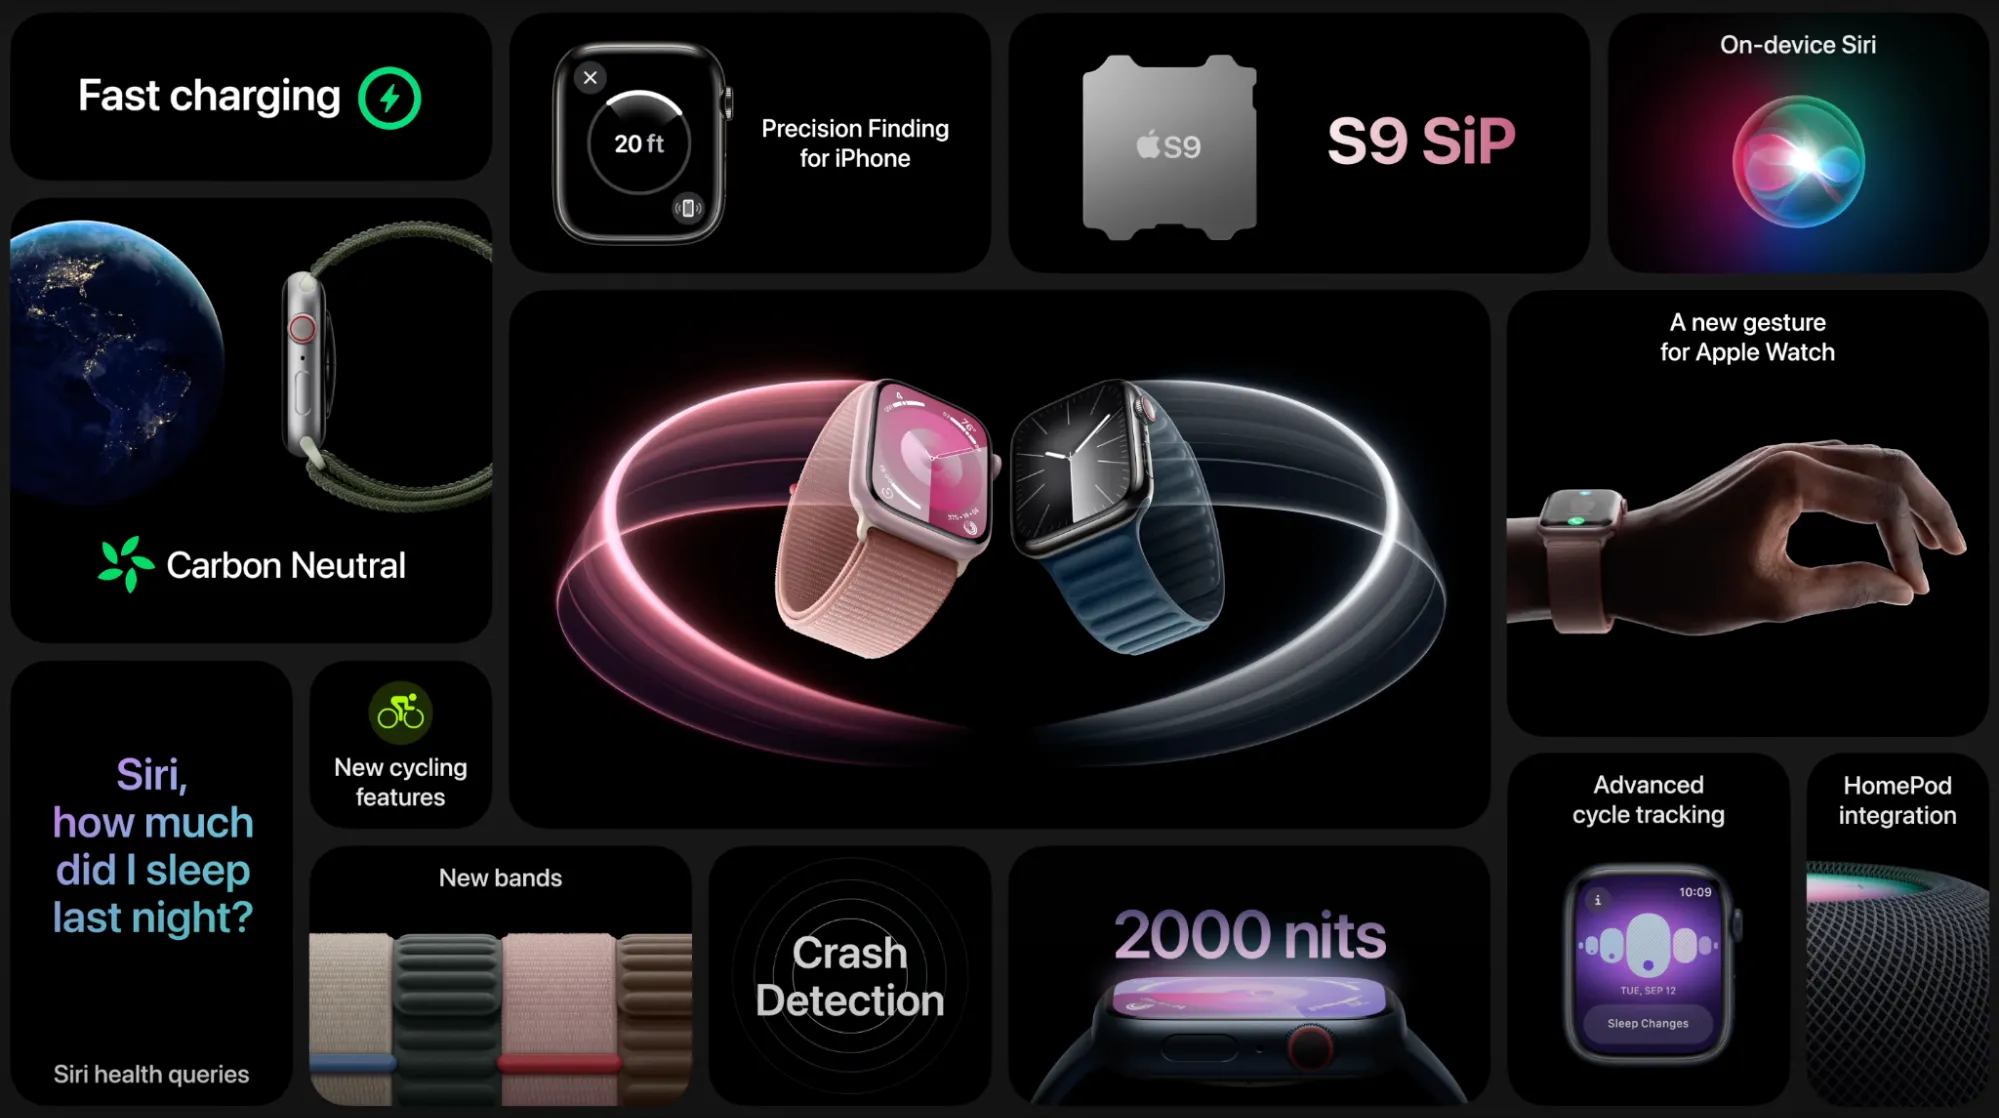 Apple Watch All Features in One Shot